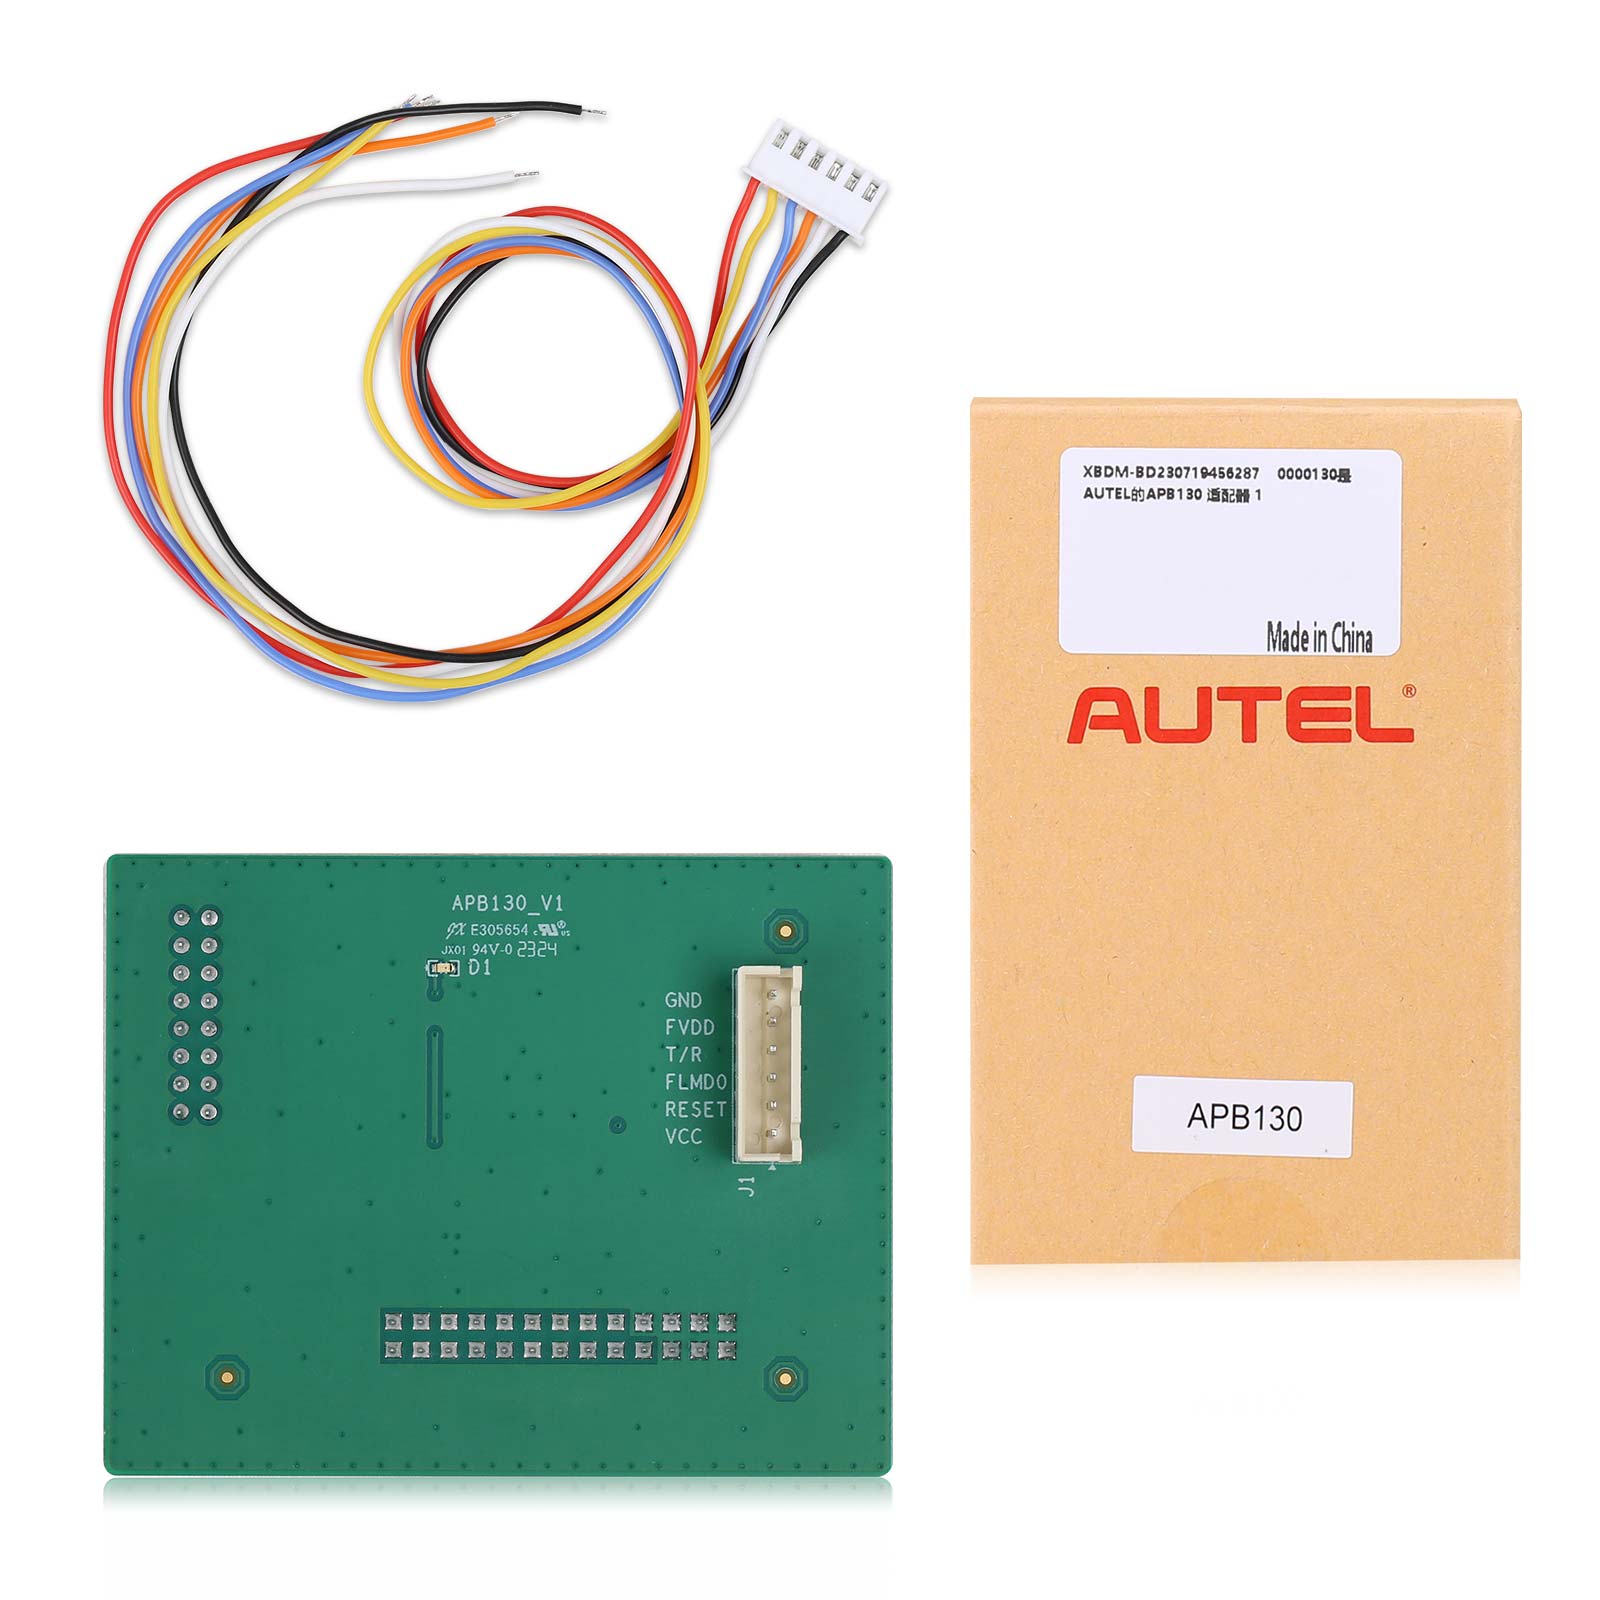 AUTEL APB130 Adapter package